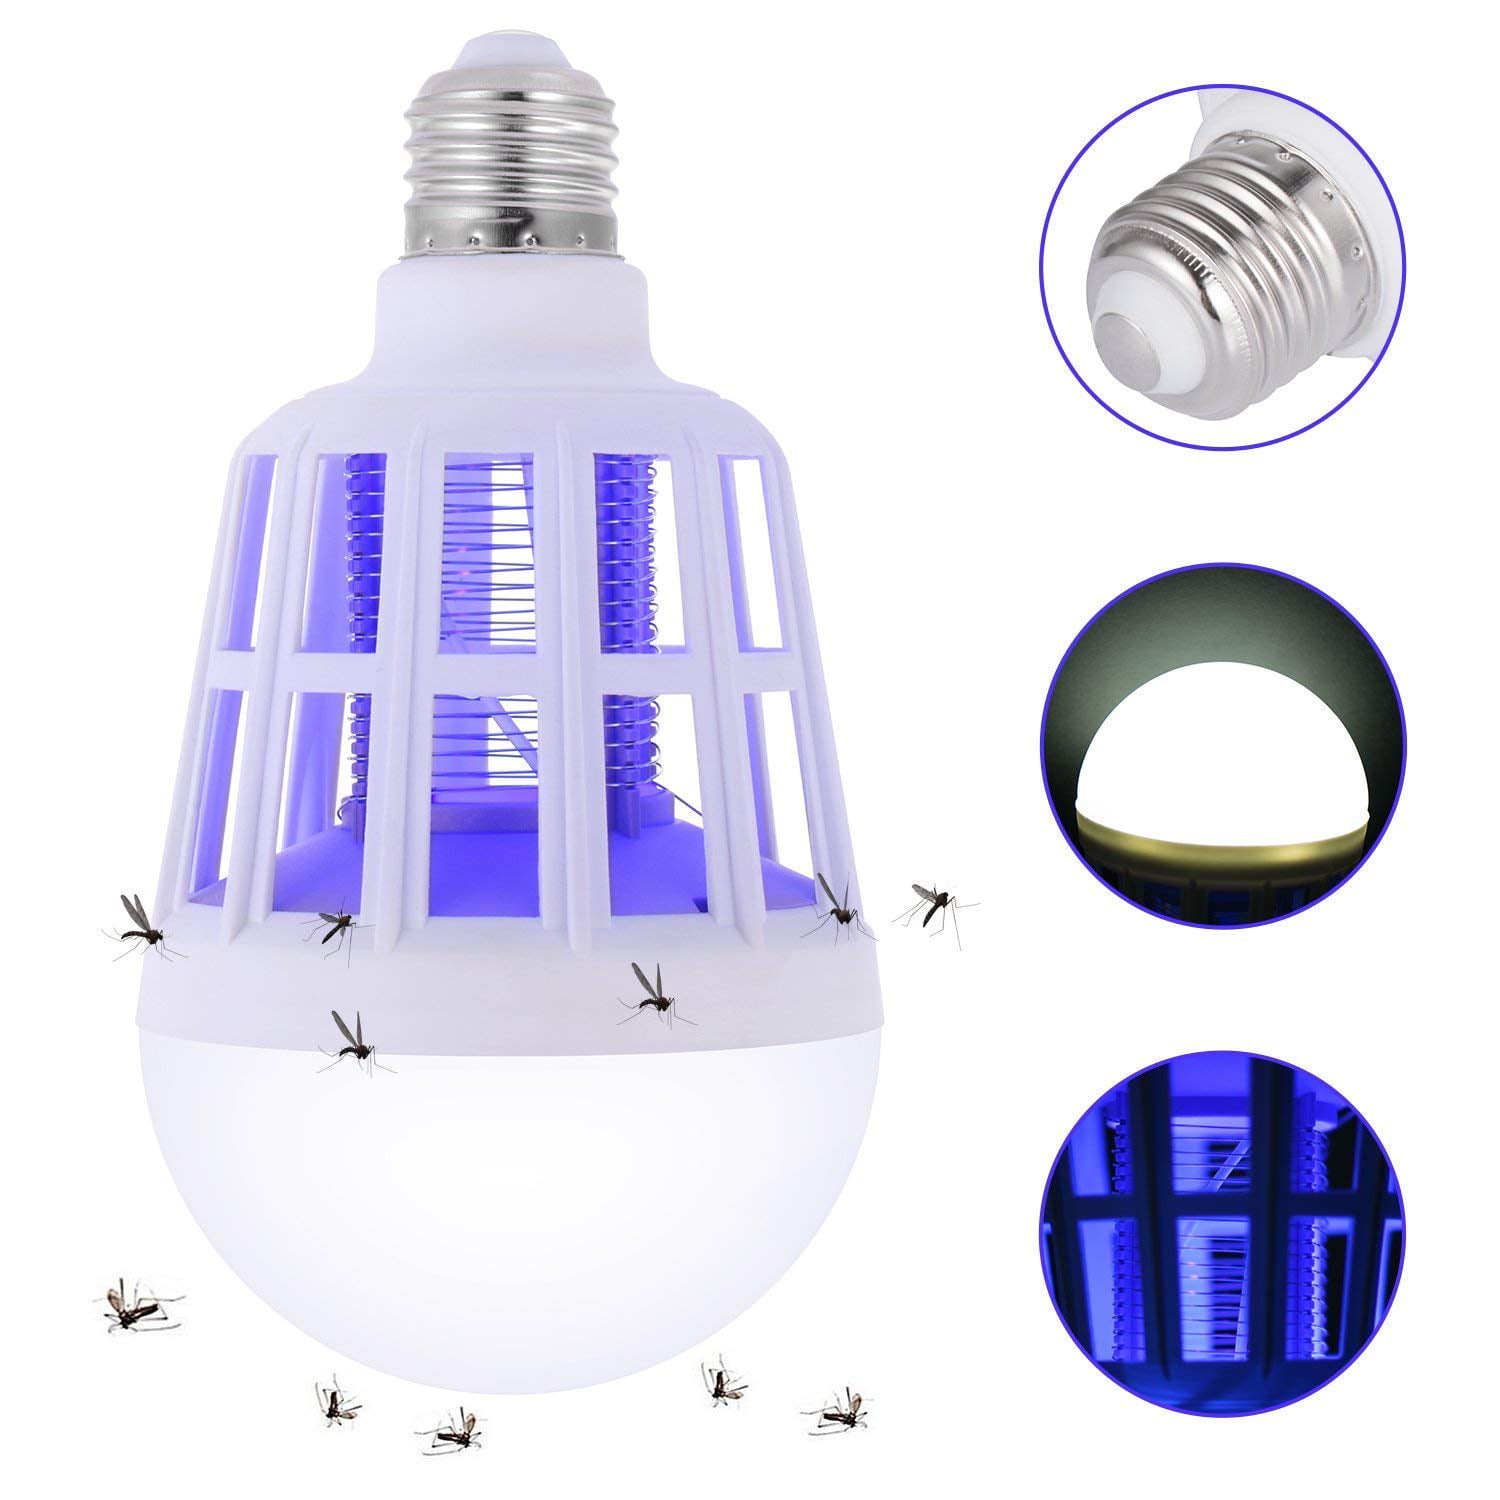 Home Mosquito Killer led Bulb 2 in 1 Light Fly Insect Bug trap Zapper Lamp E27 